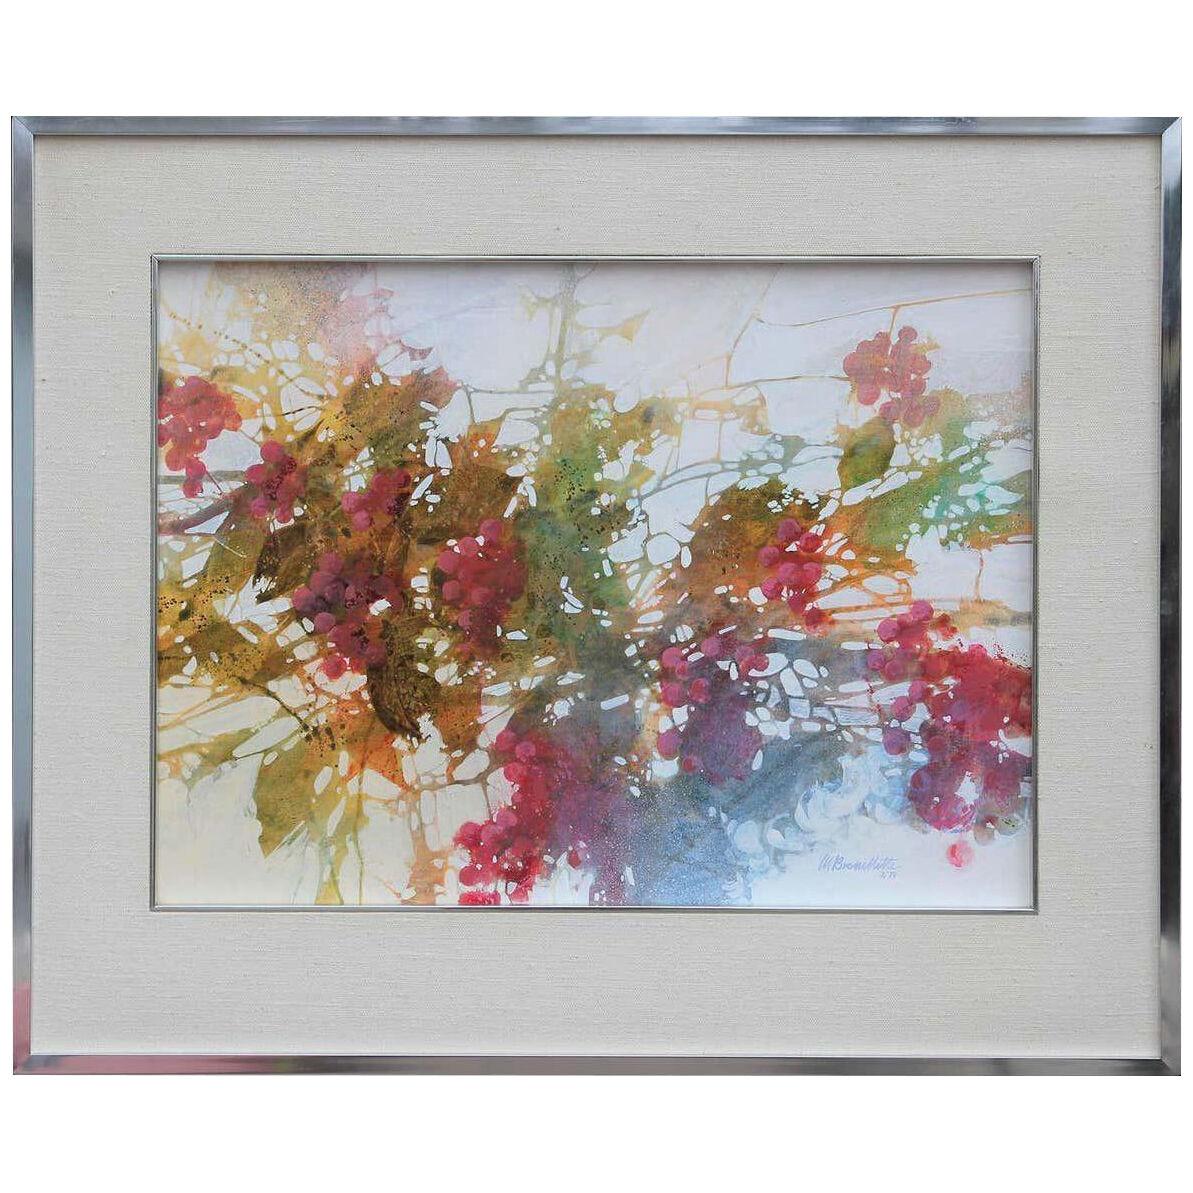 1970s Abstract Colorful Acrylic Painting by Maureen Brouillette, Framed